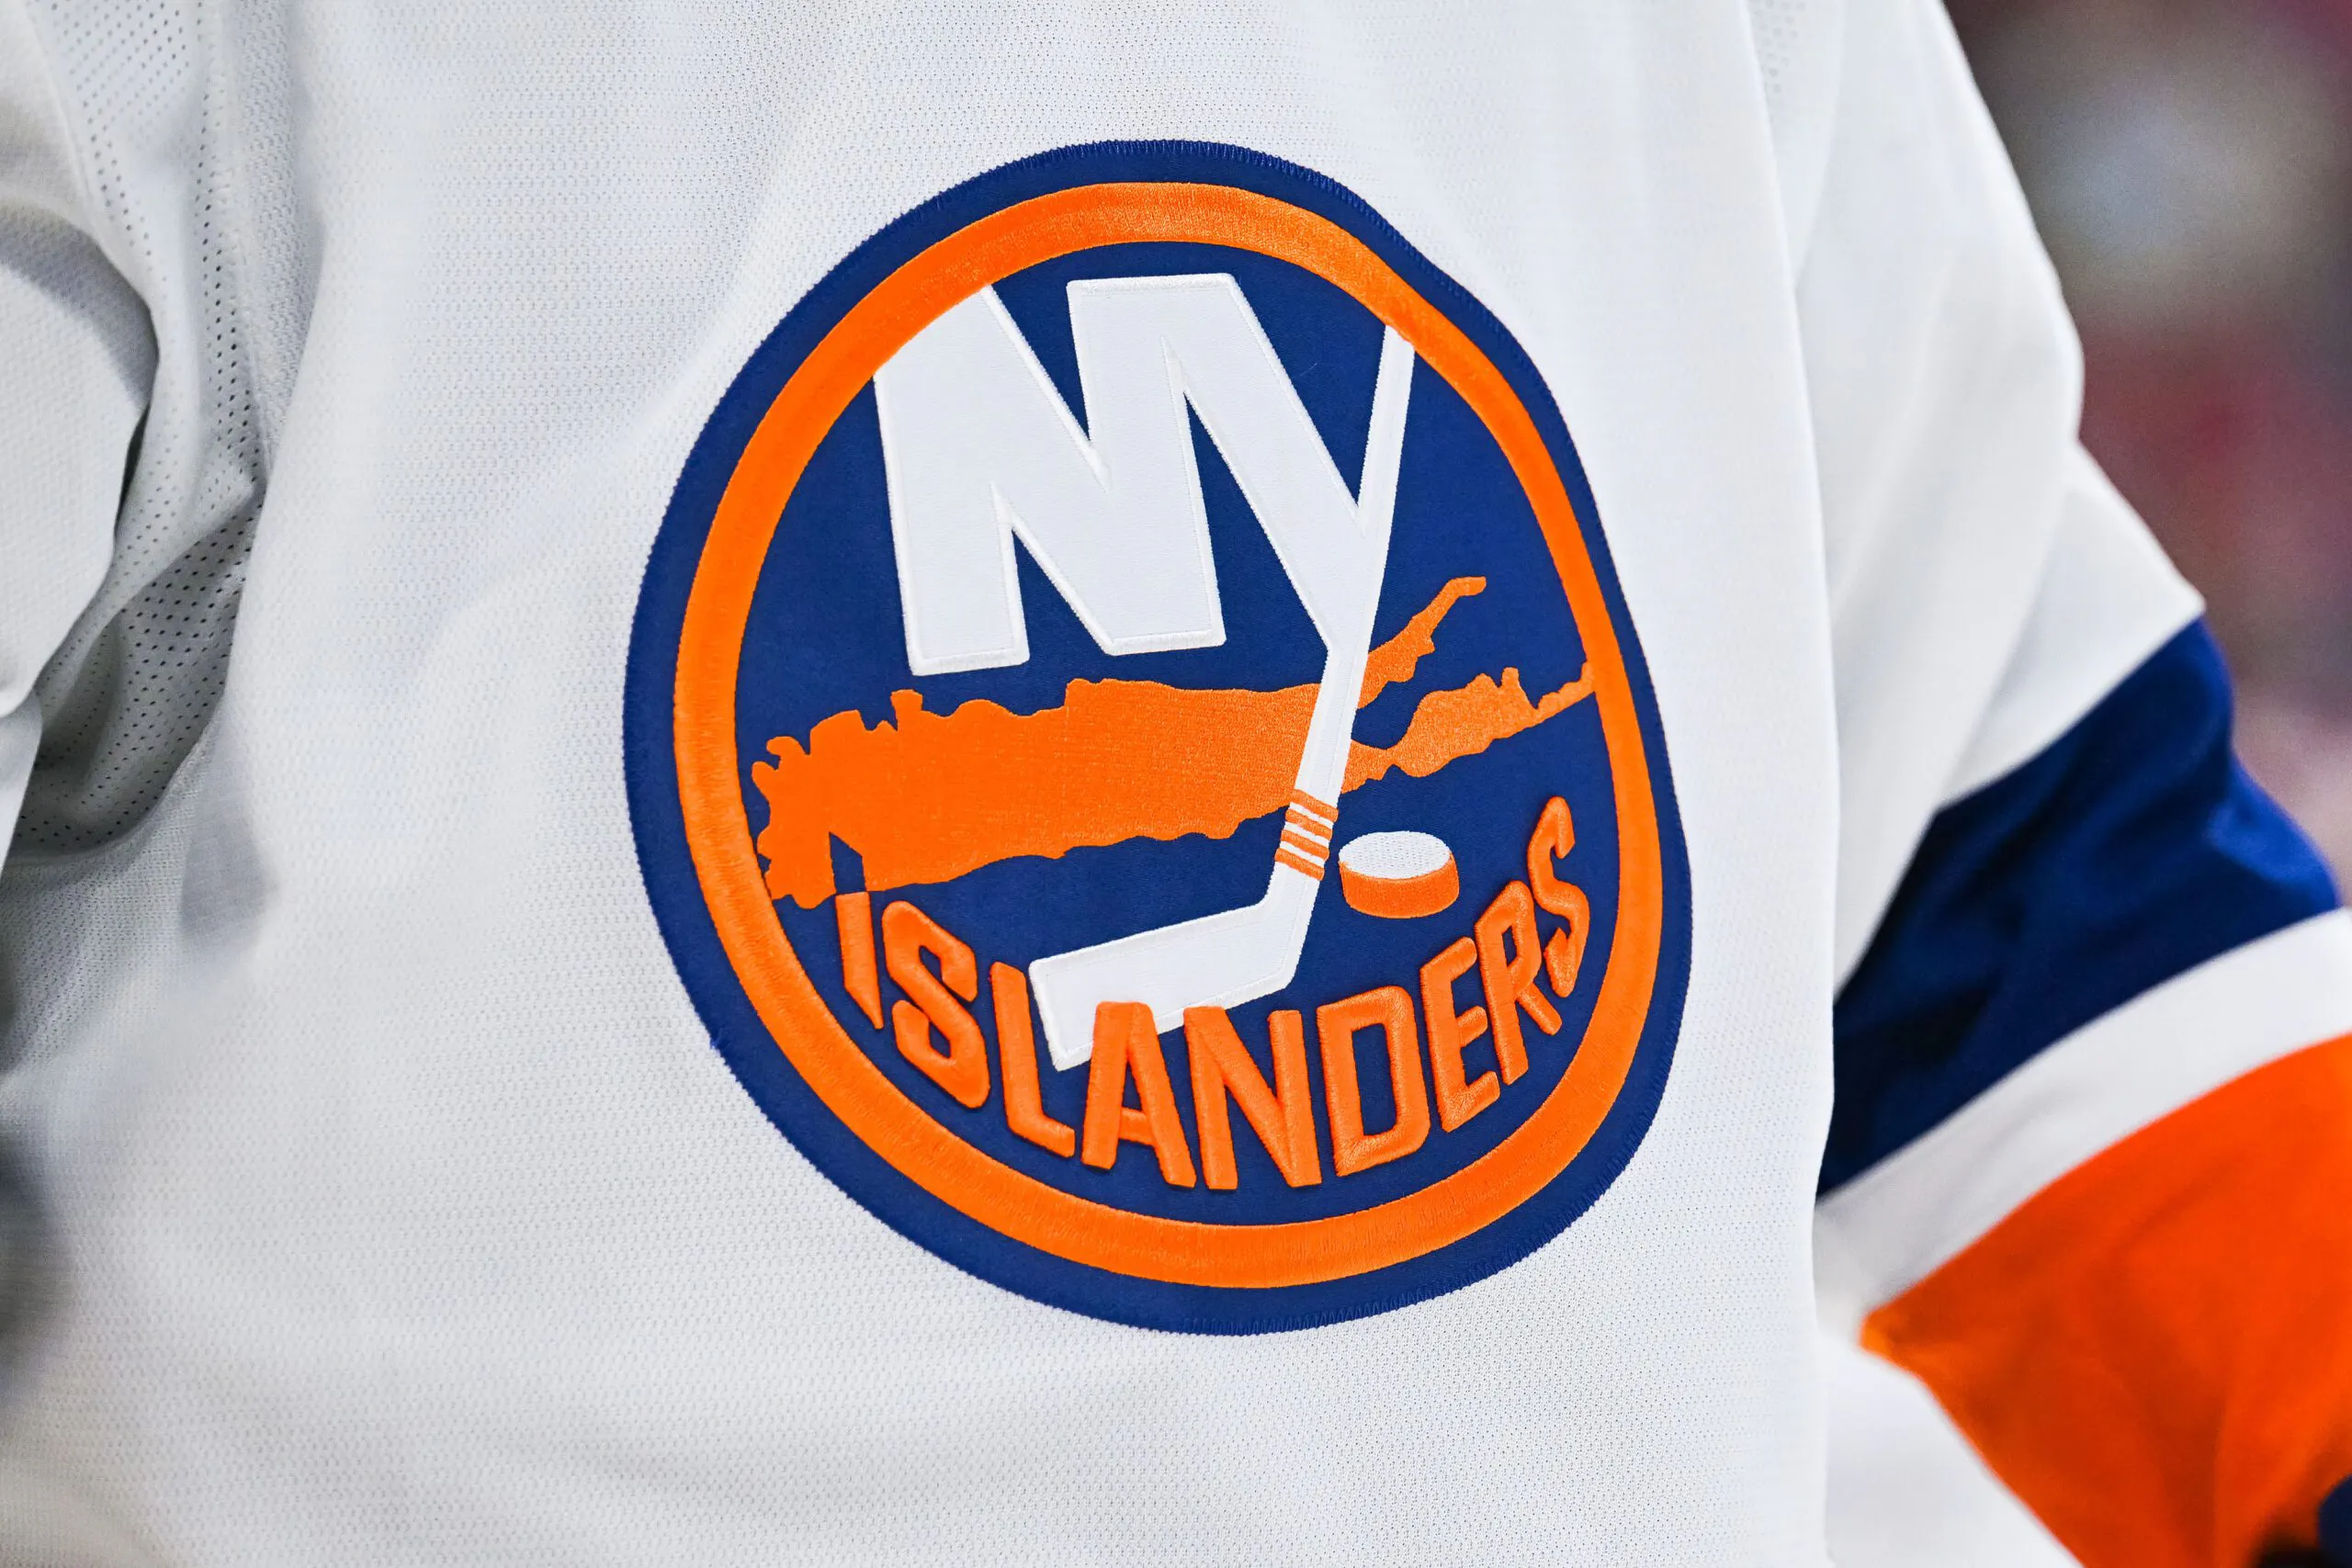 Islanders’ sign Henrik Tikkanen and Alex Jefferies to two-year, entry-level contracts